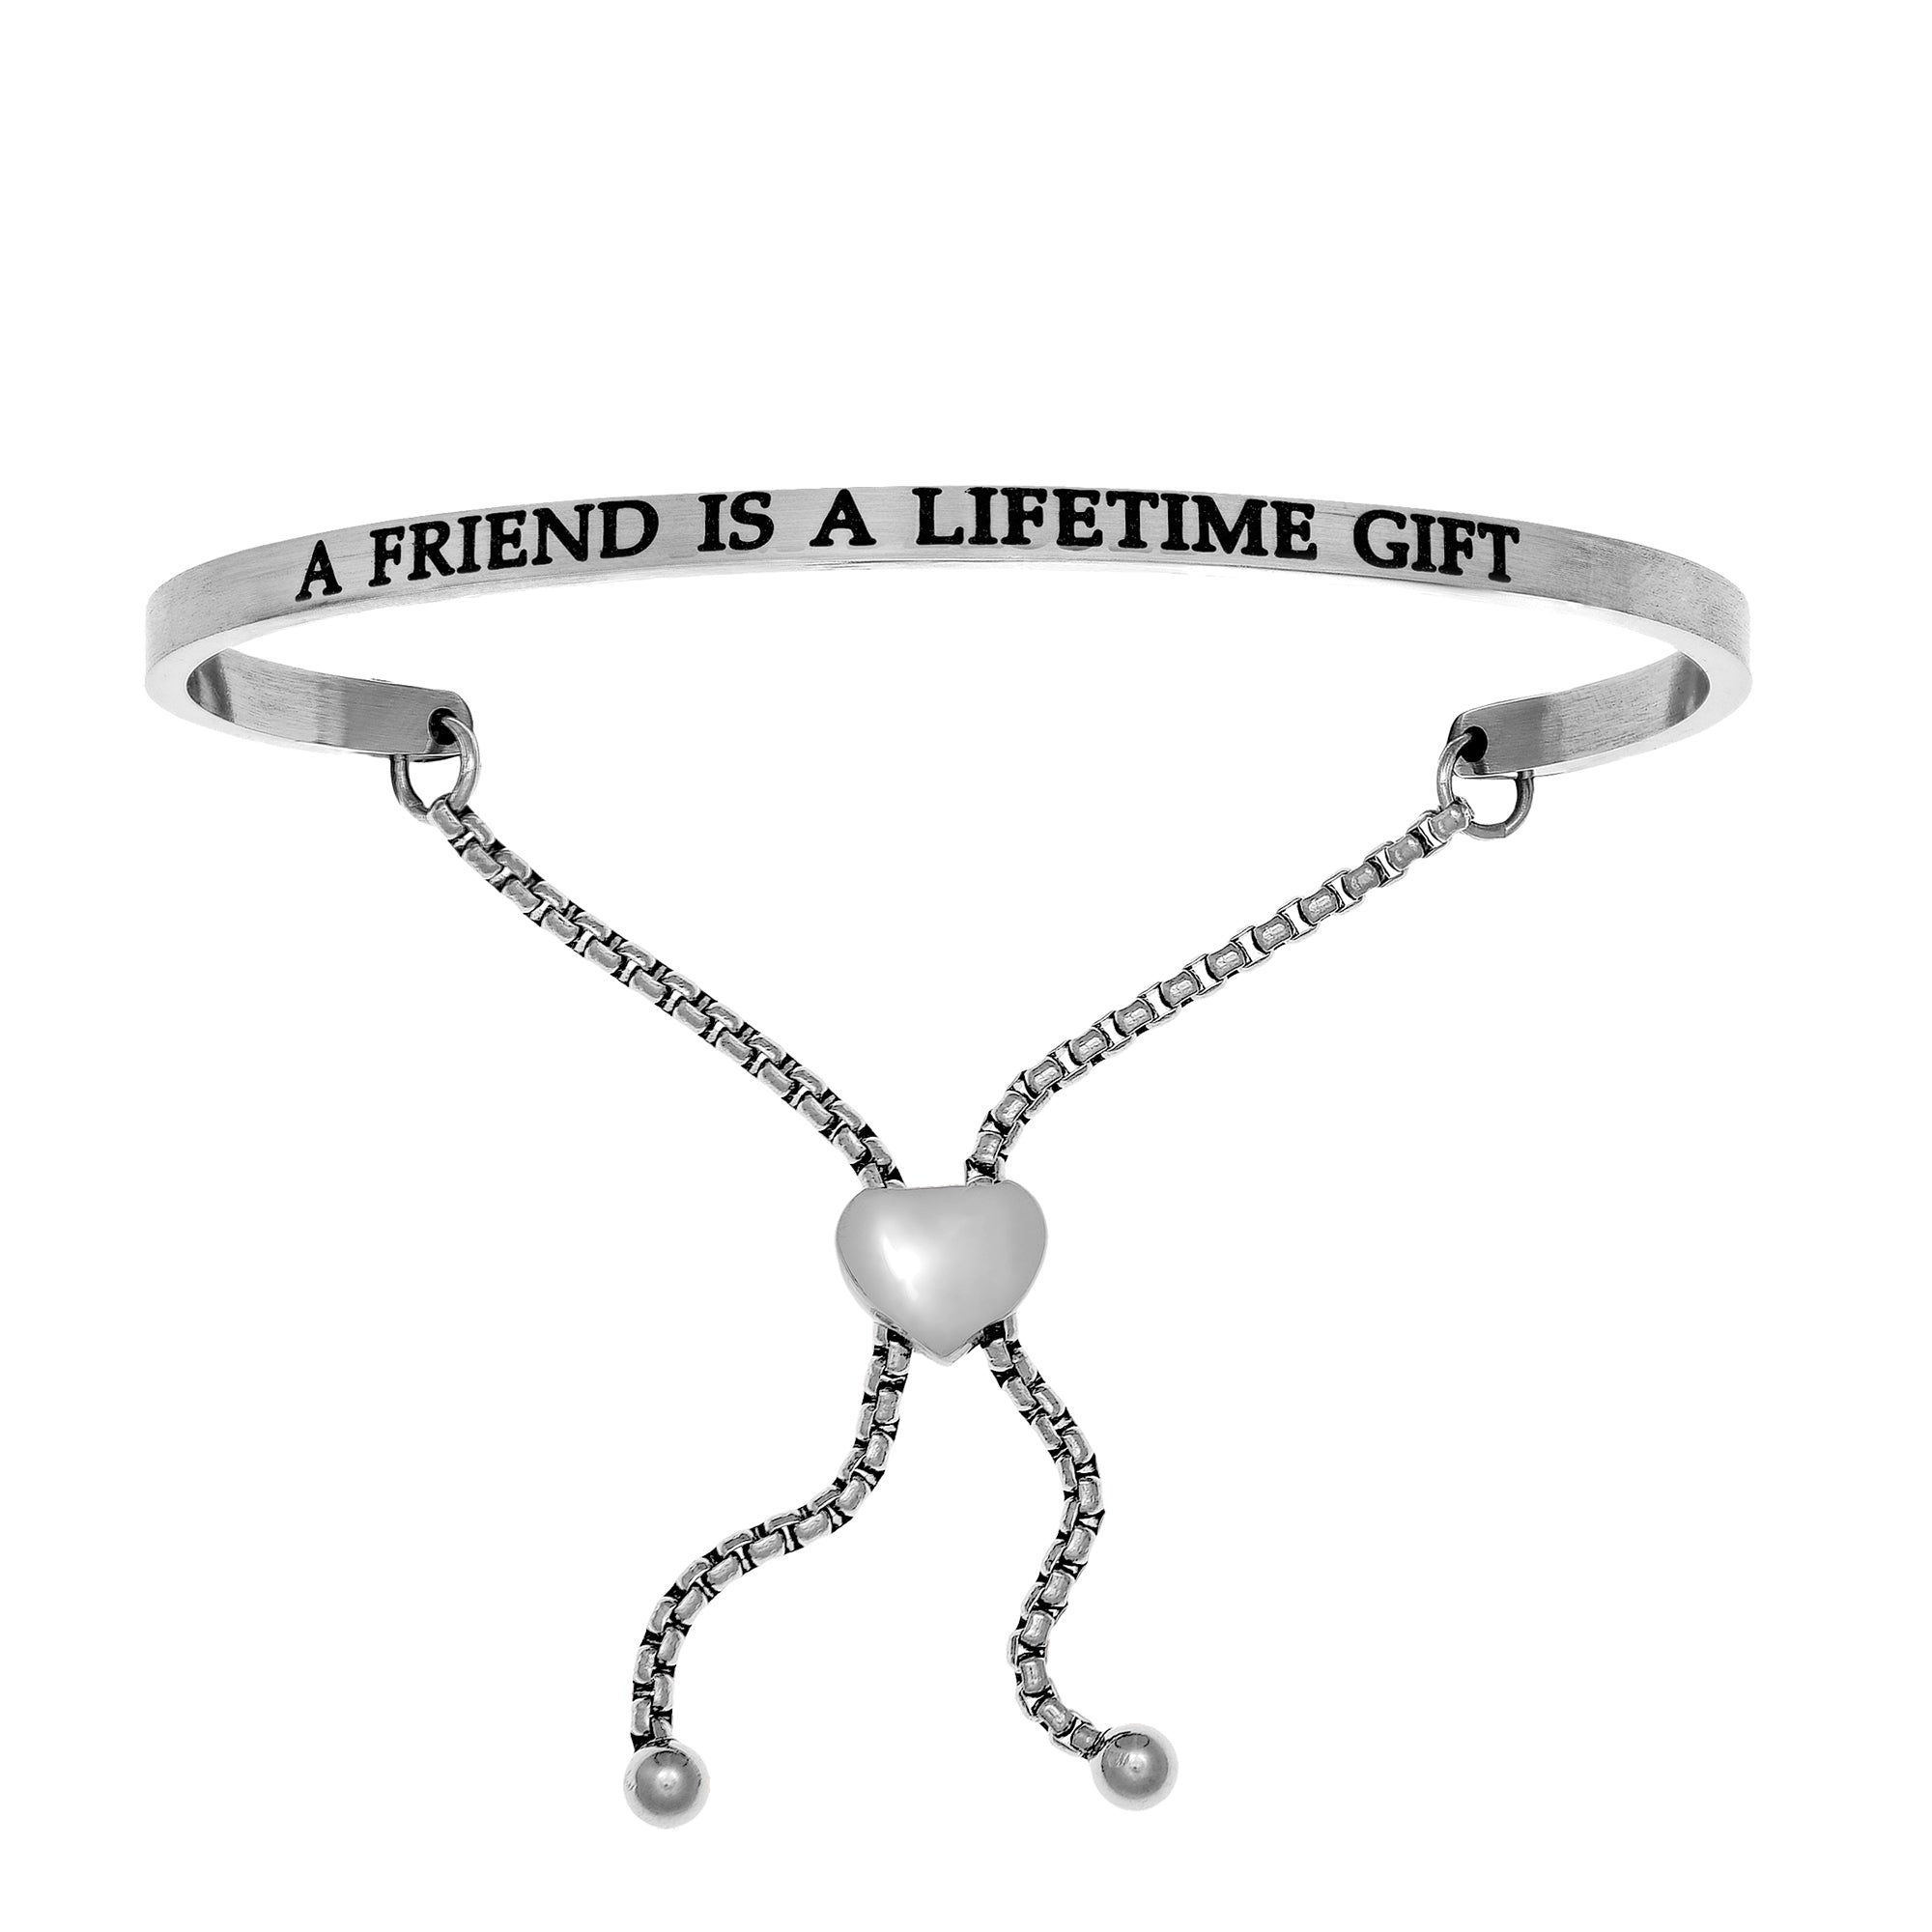 Intuitions Stainless Steel A FRIEND IS A LIFETIME GIFT Diamond Accent Adjustable Bracelet fine designer jewelry for men and women